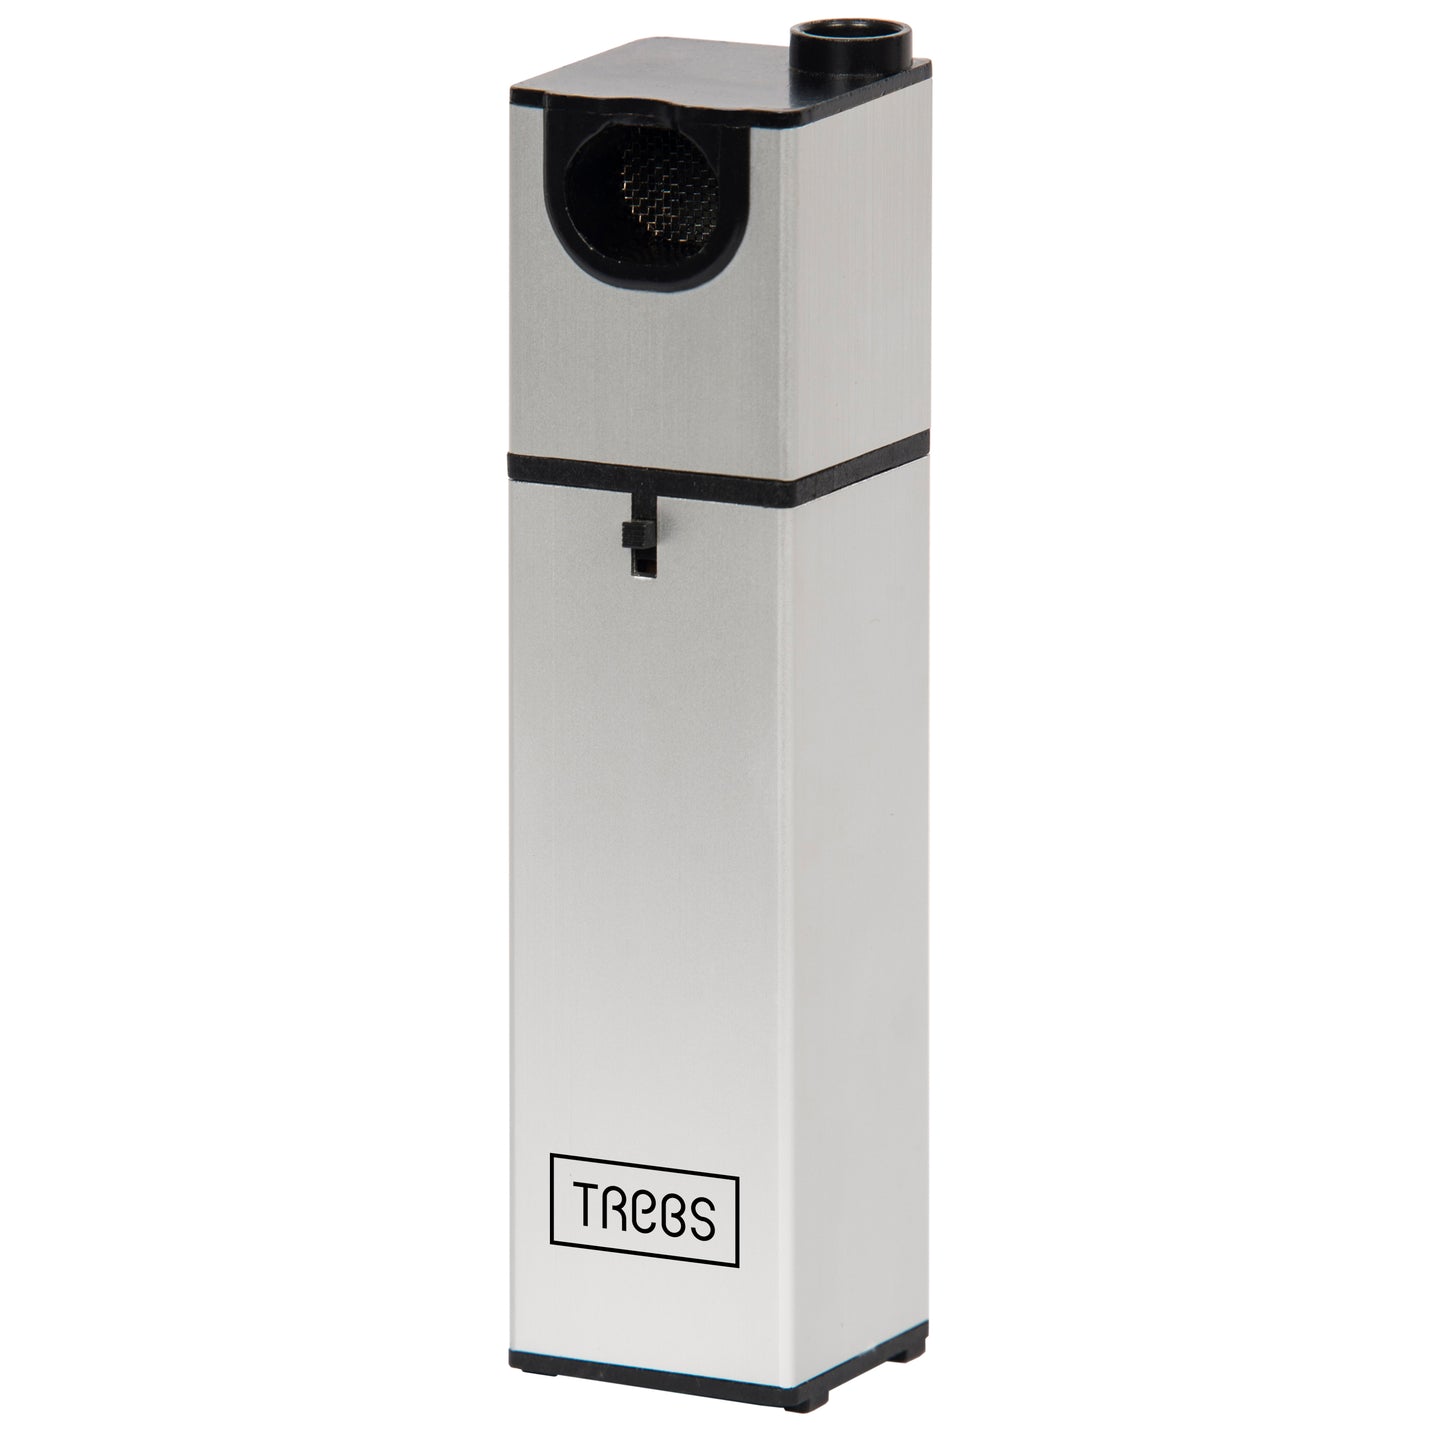 Trebs 99355 - Smoker / Comfortcook for adding extra flavour and aroma to dishes and drinks